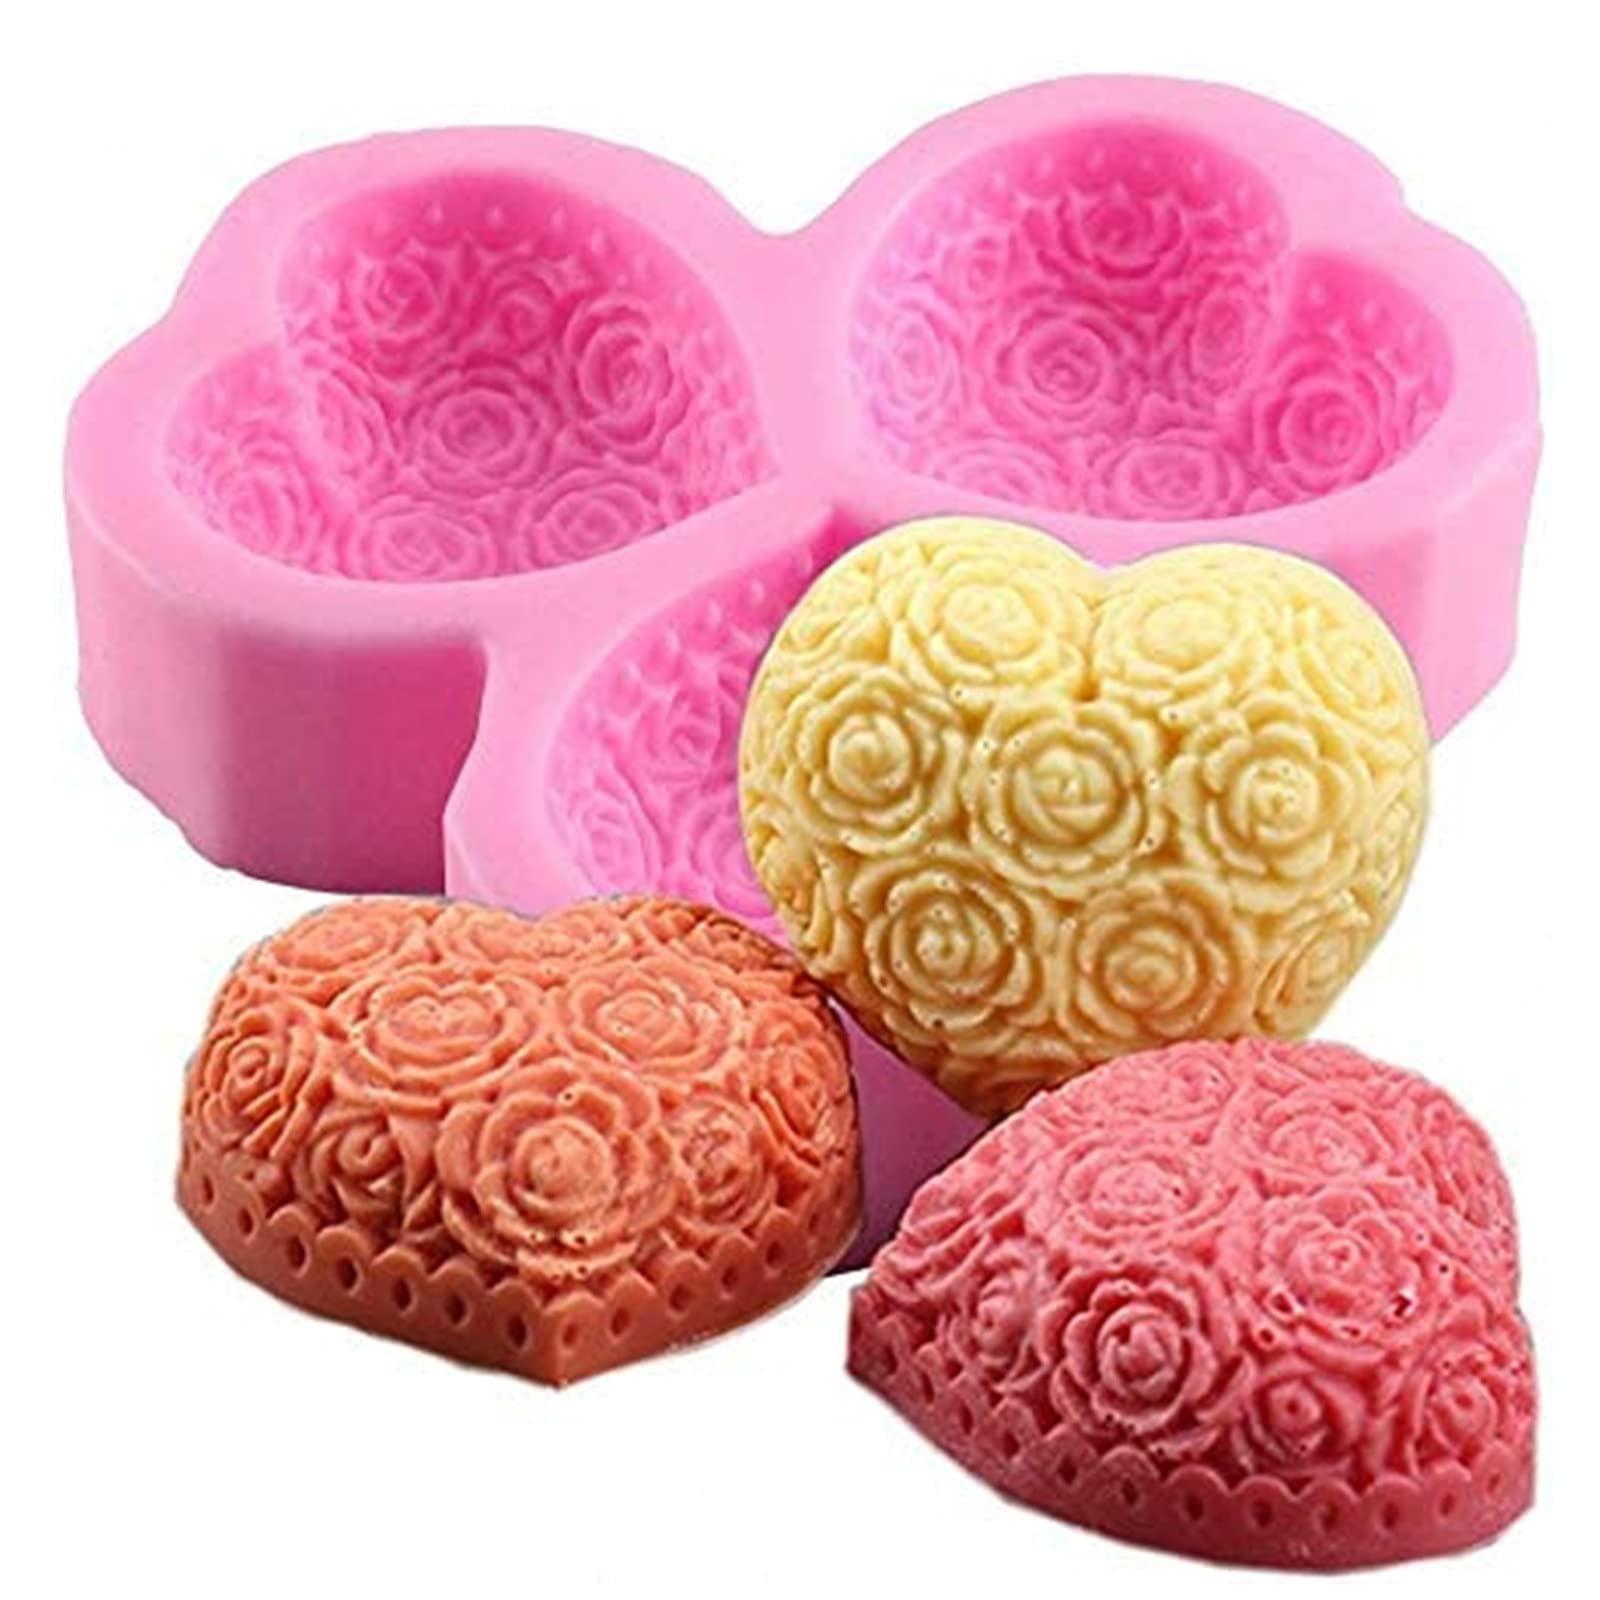 NINEXY 3-cavity heart rose flower silicone soap mold fondant mold for cake decoration, chocolate,candle, bath bomb, lotion bar